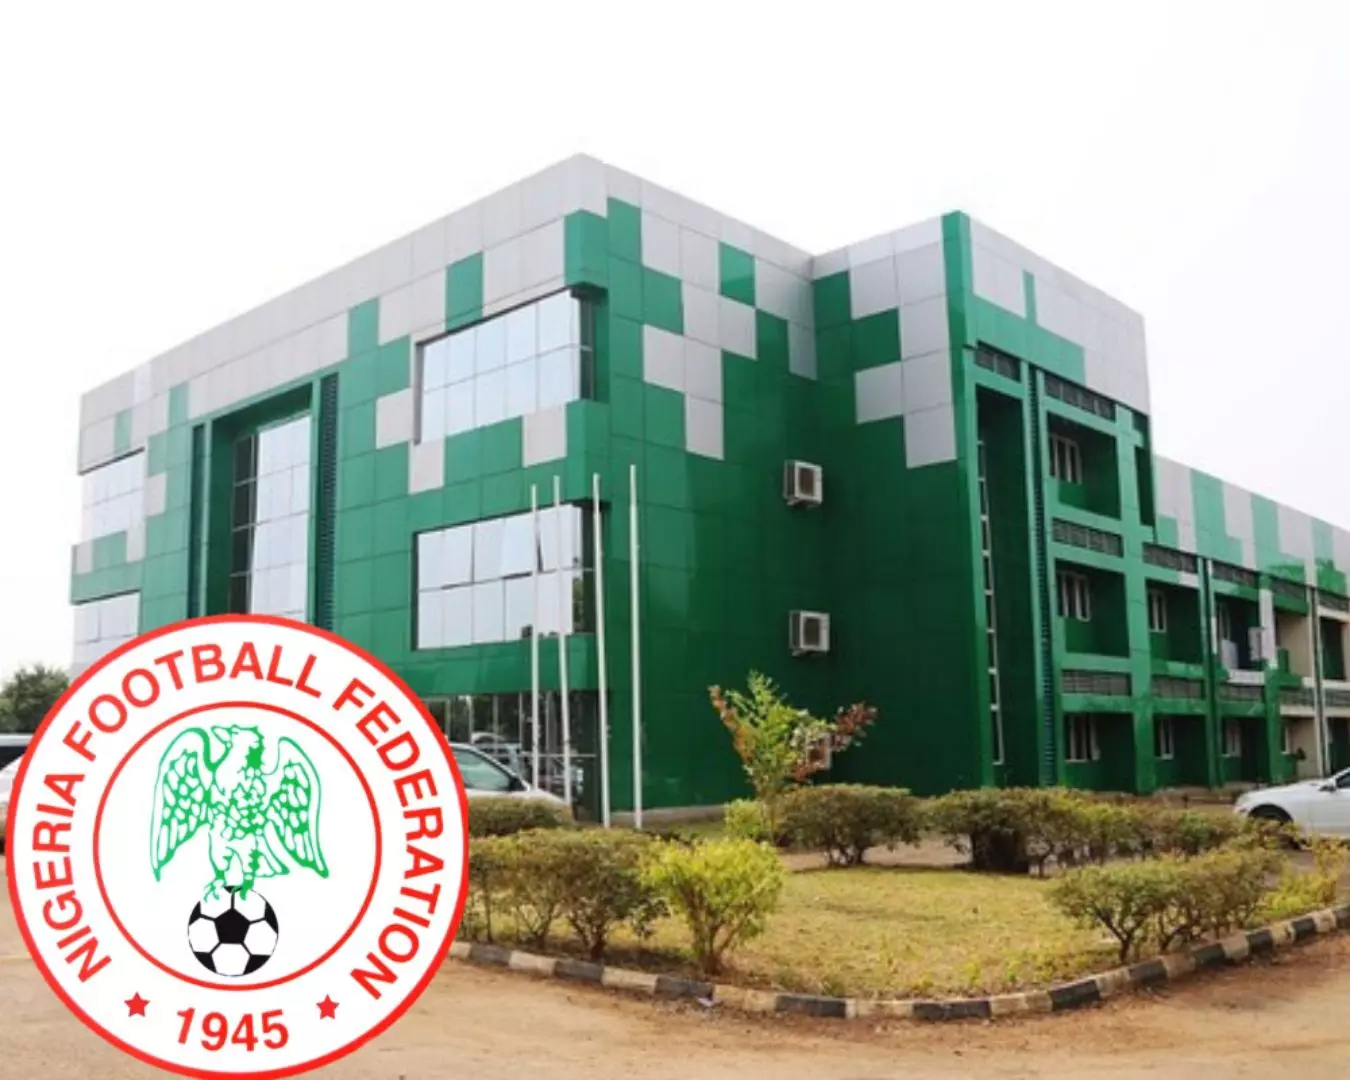 NFF Elections: Stakeholders express mixed reactions over court order